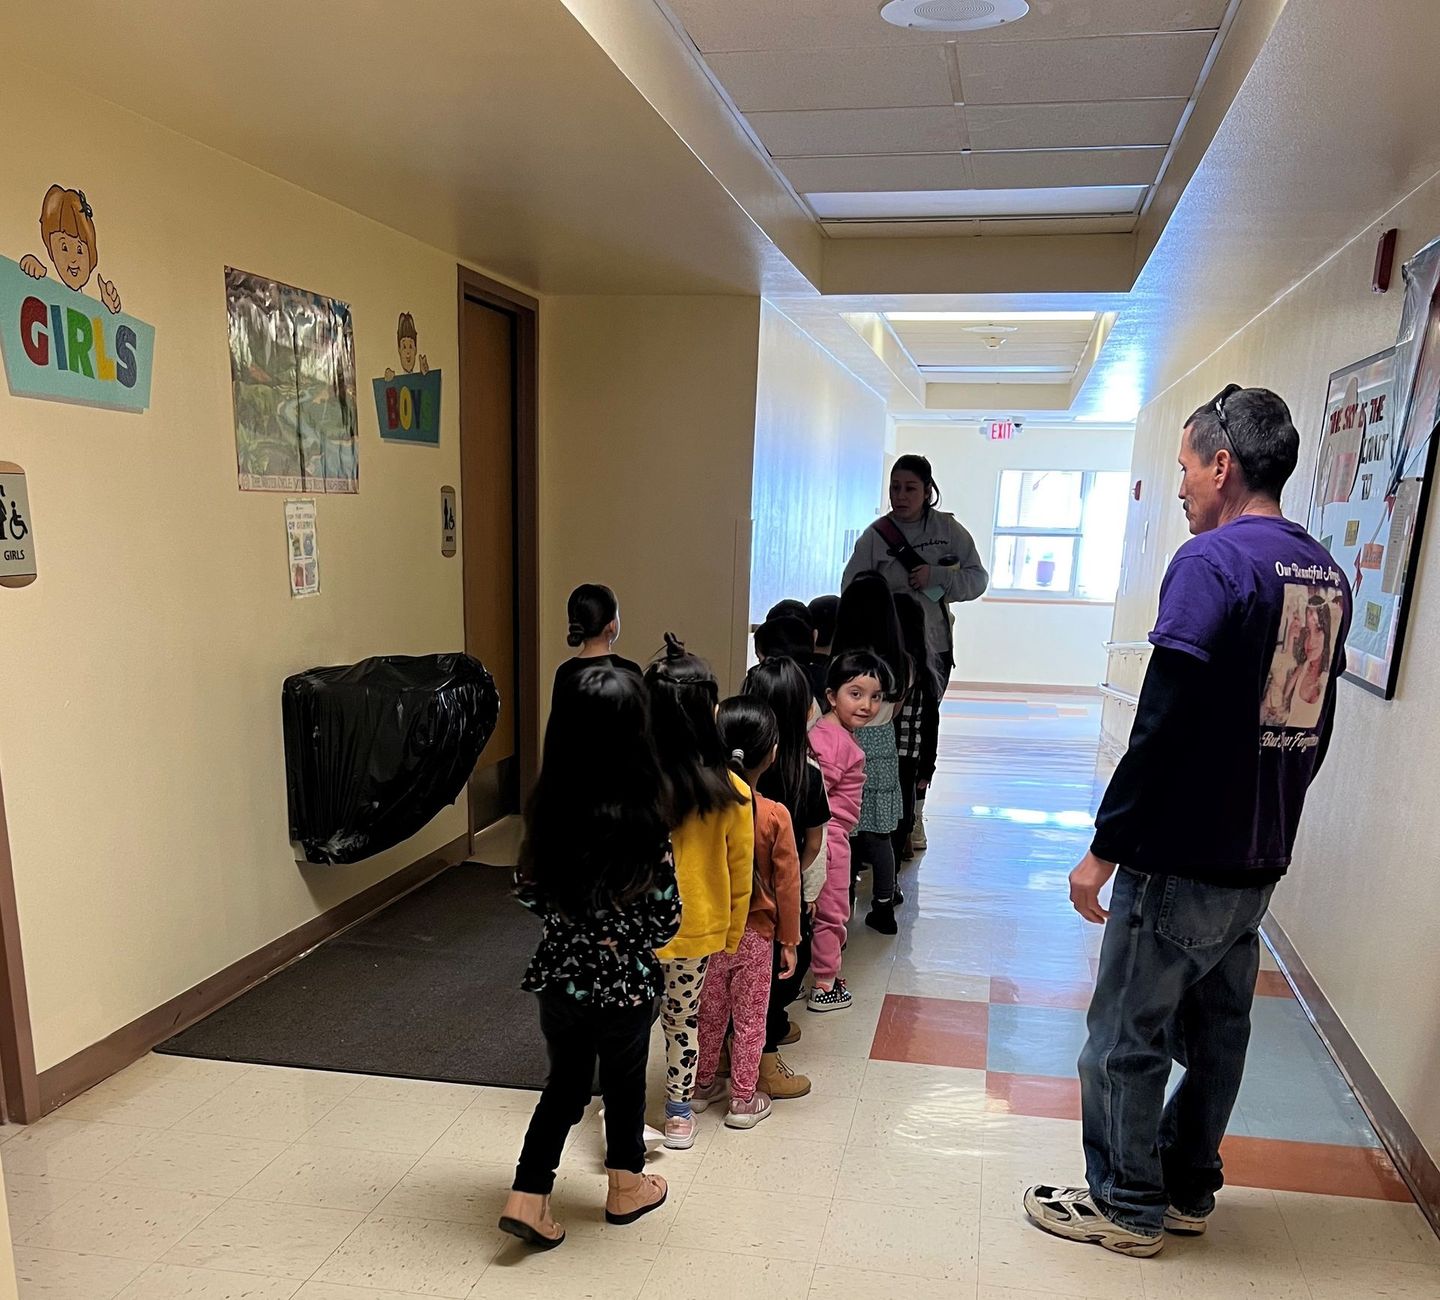 a man in a purple shirt is talking to a group of children in a hallway .